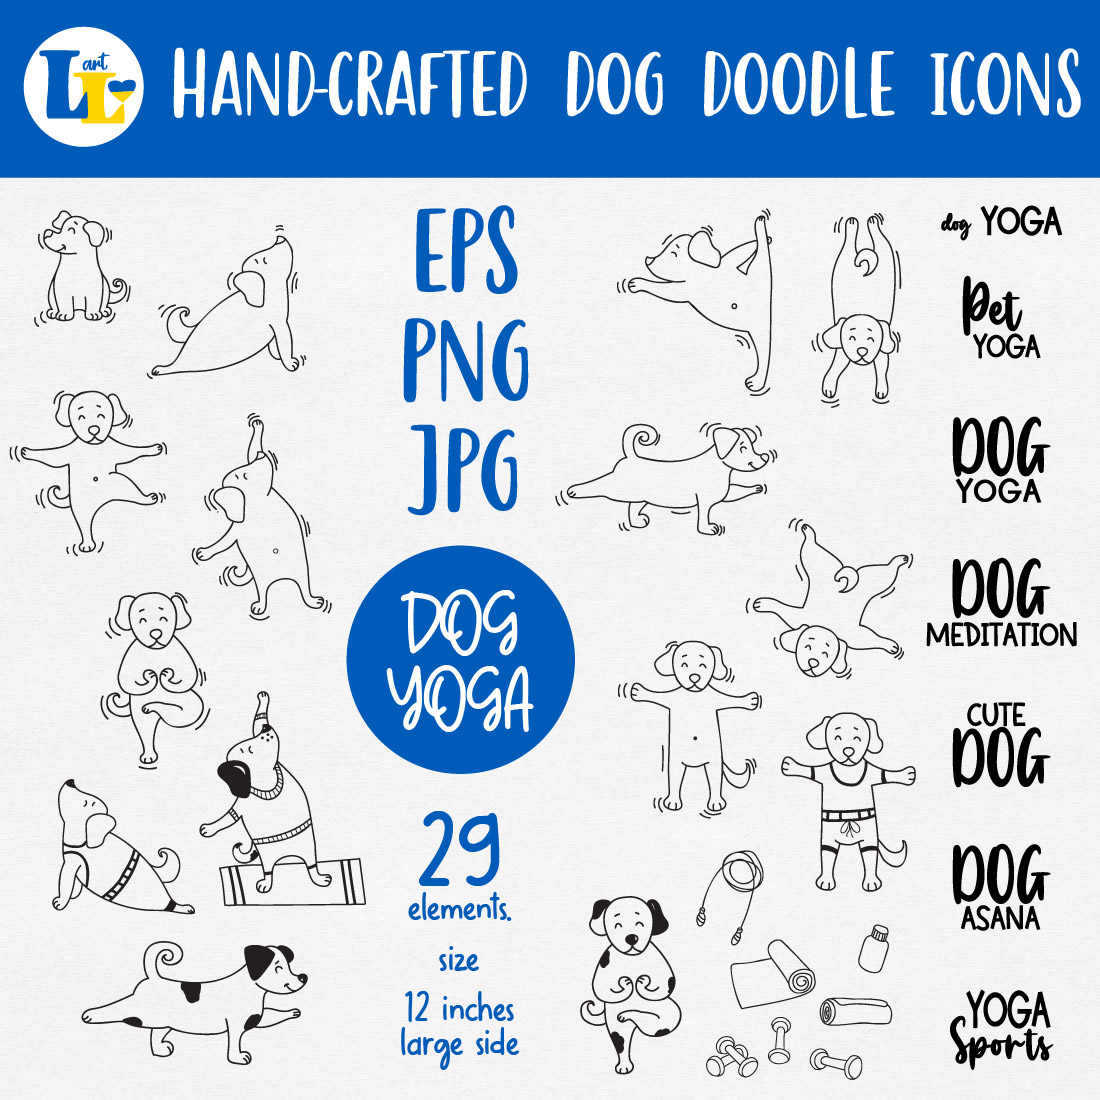 Yoga Dog Hand drawn Puppies Doodle Icons cover image.